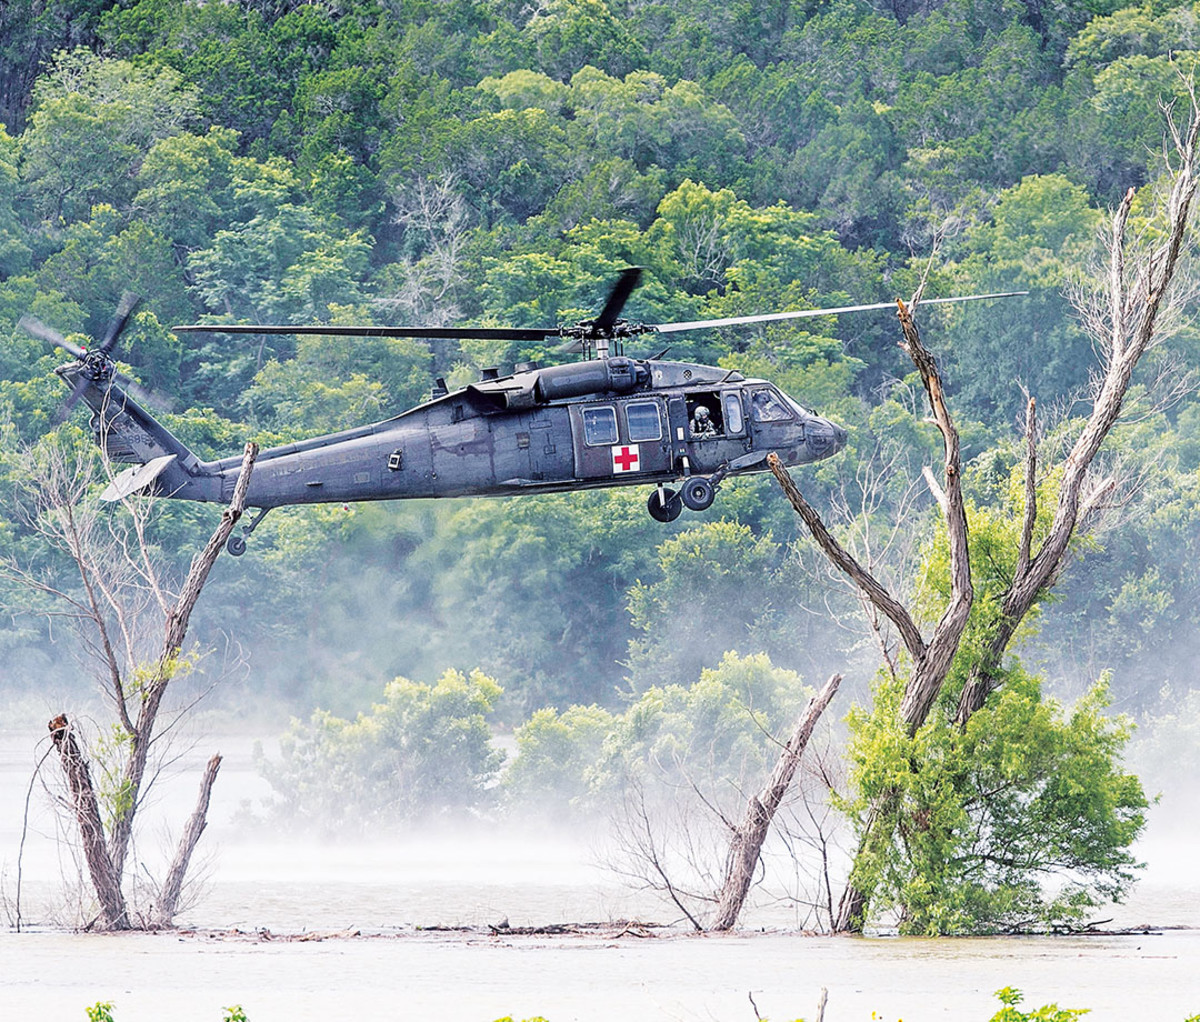 An Army helicopter searches for the missing soldiers swept away in Owl Creek.